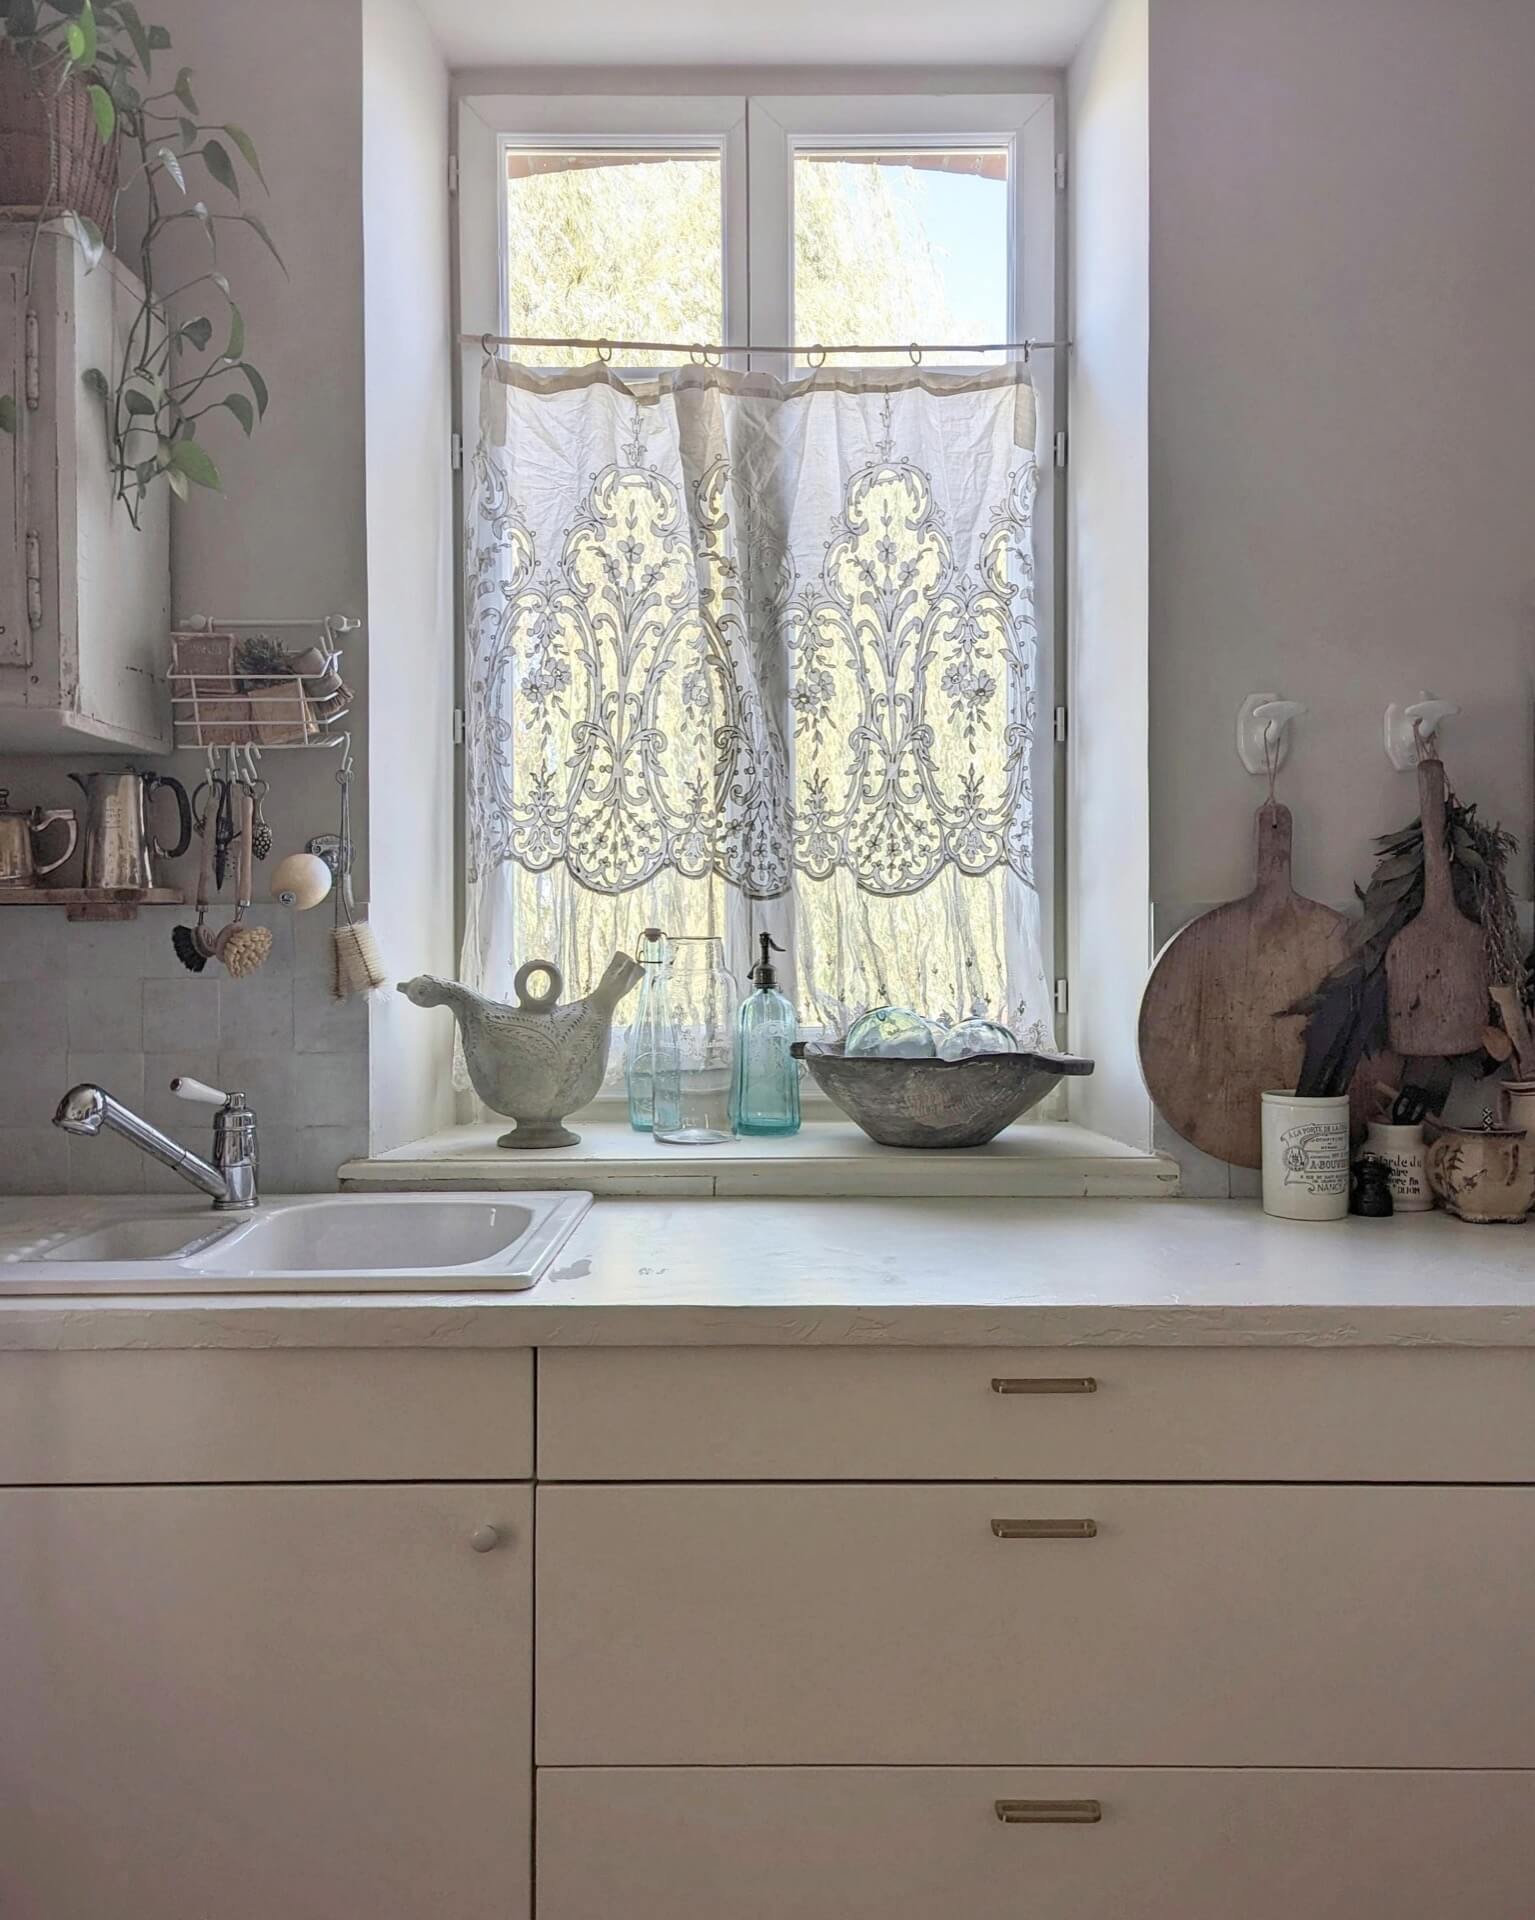 Kitchen with lace curtain and old wooden chopping boards and vintage decor